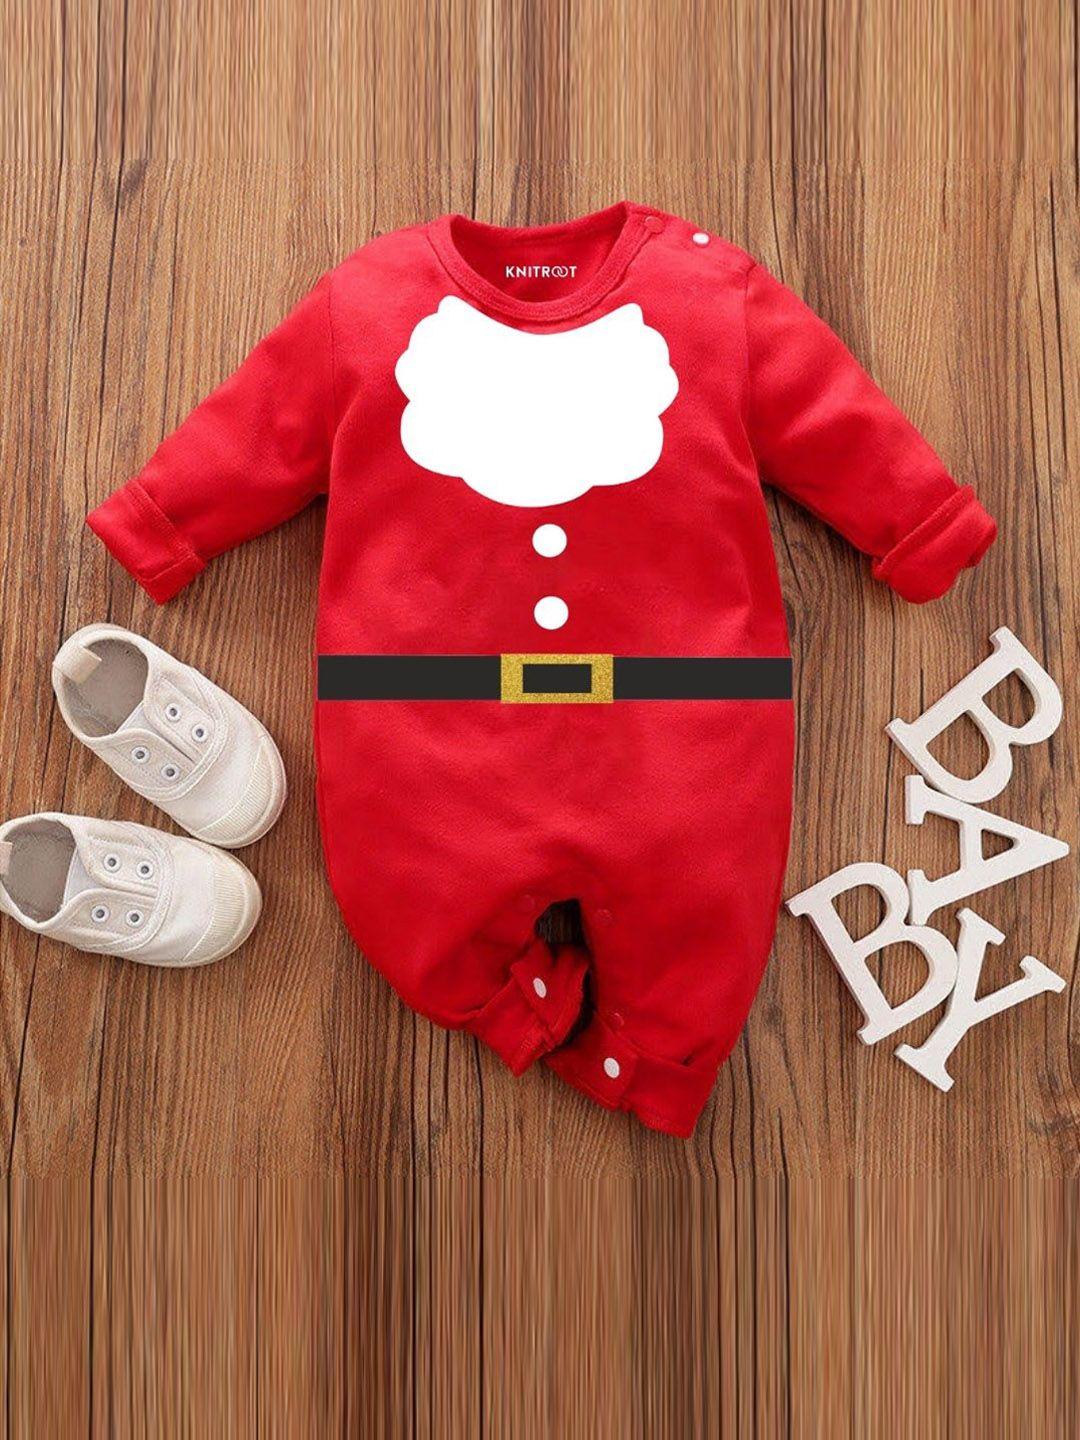 knitroot red & white santa costume rompers